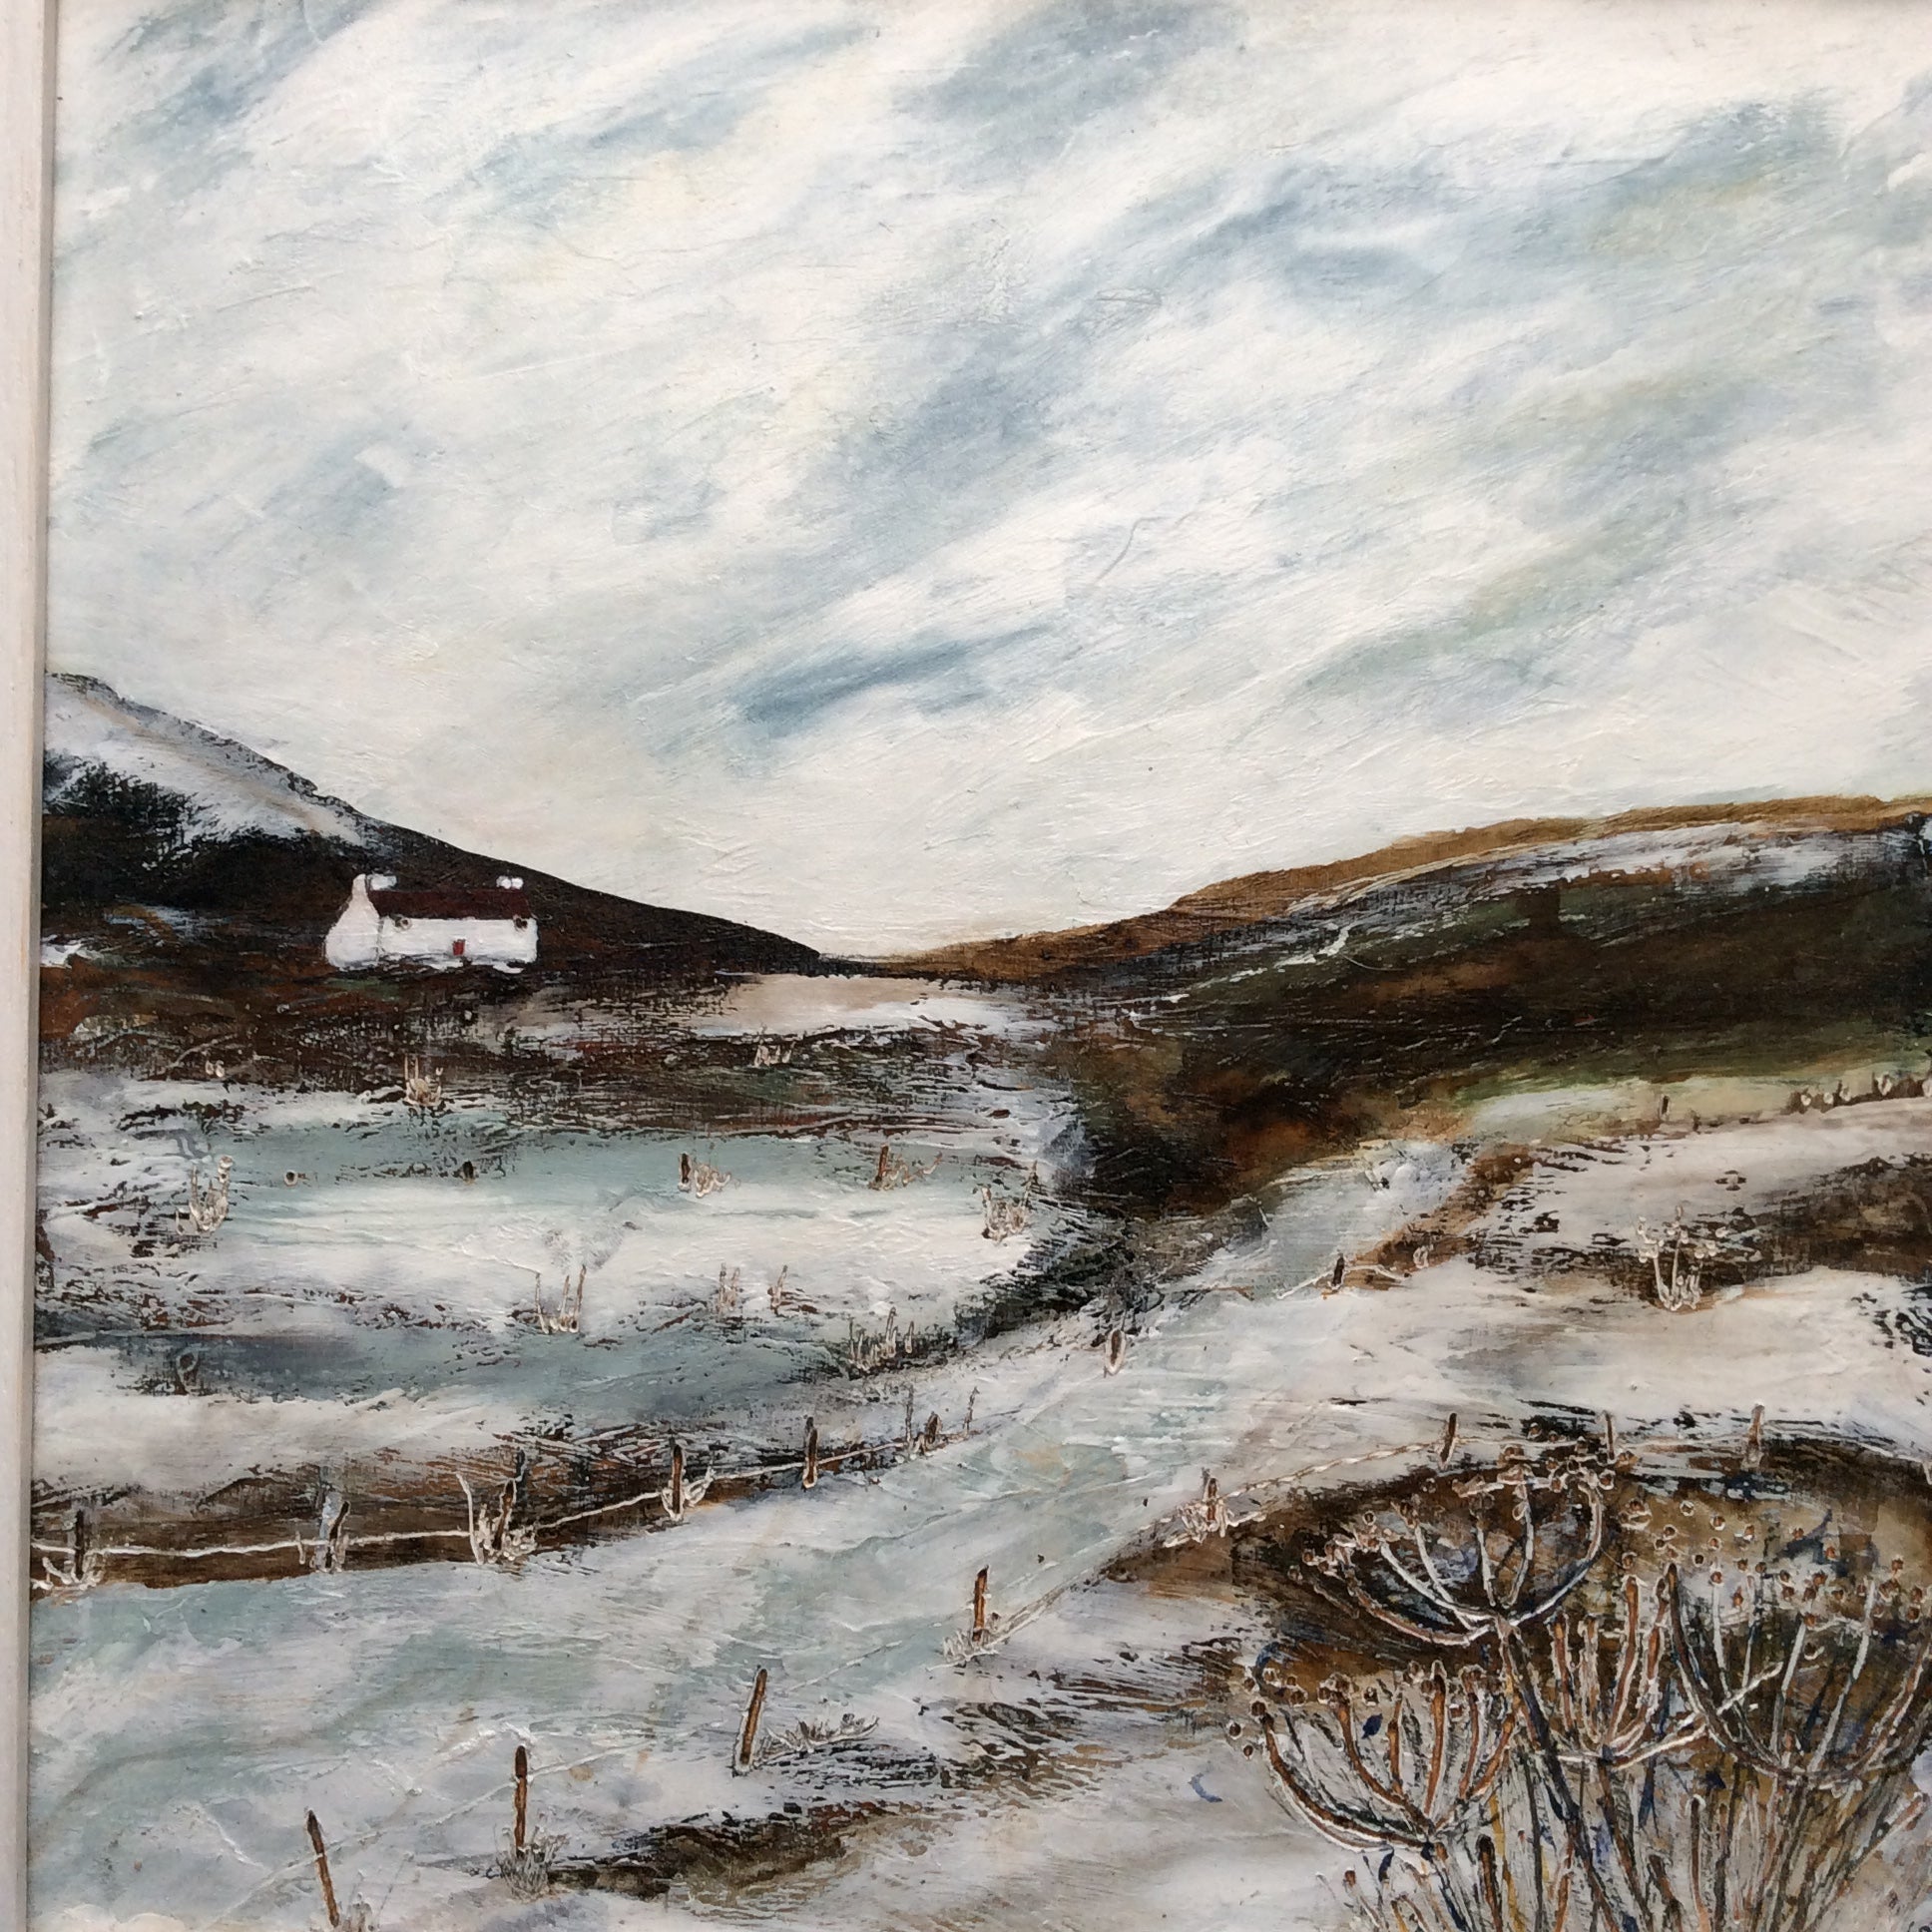 Mixed Media Art By Louise O'Hara “A moorland frost”